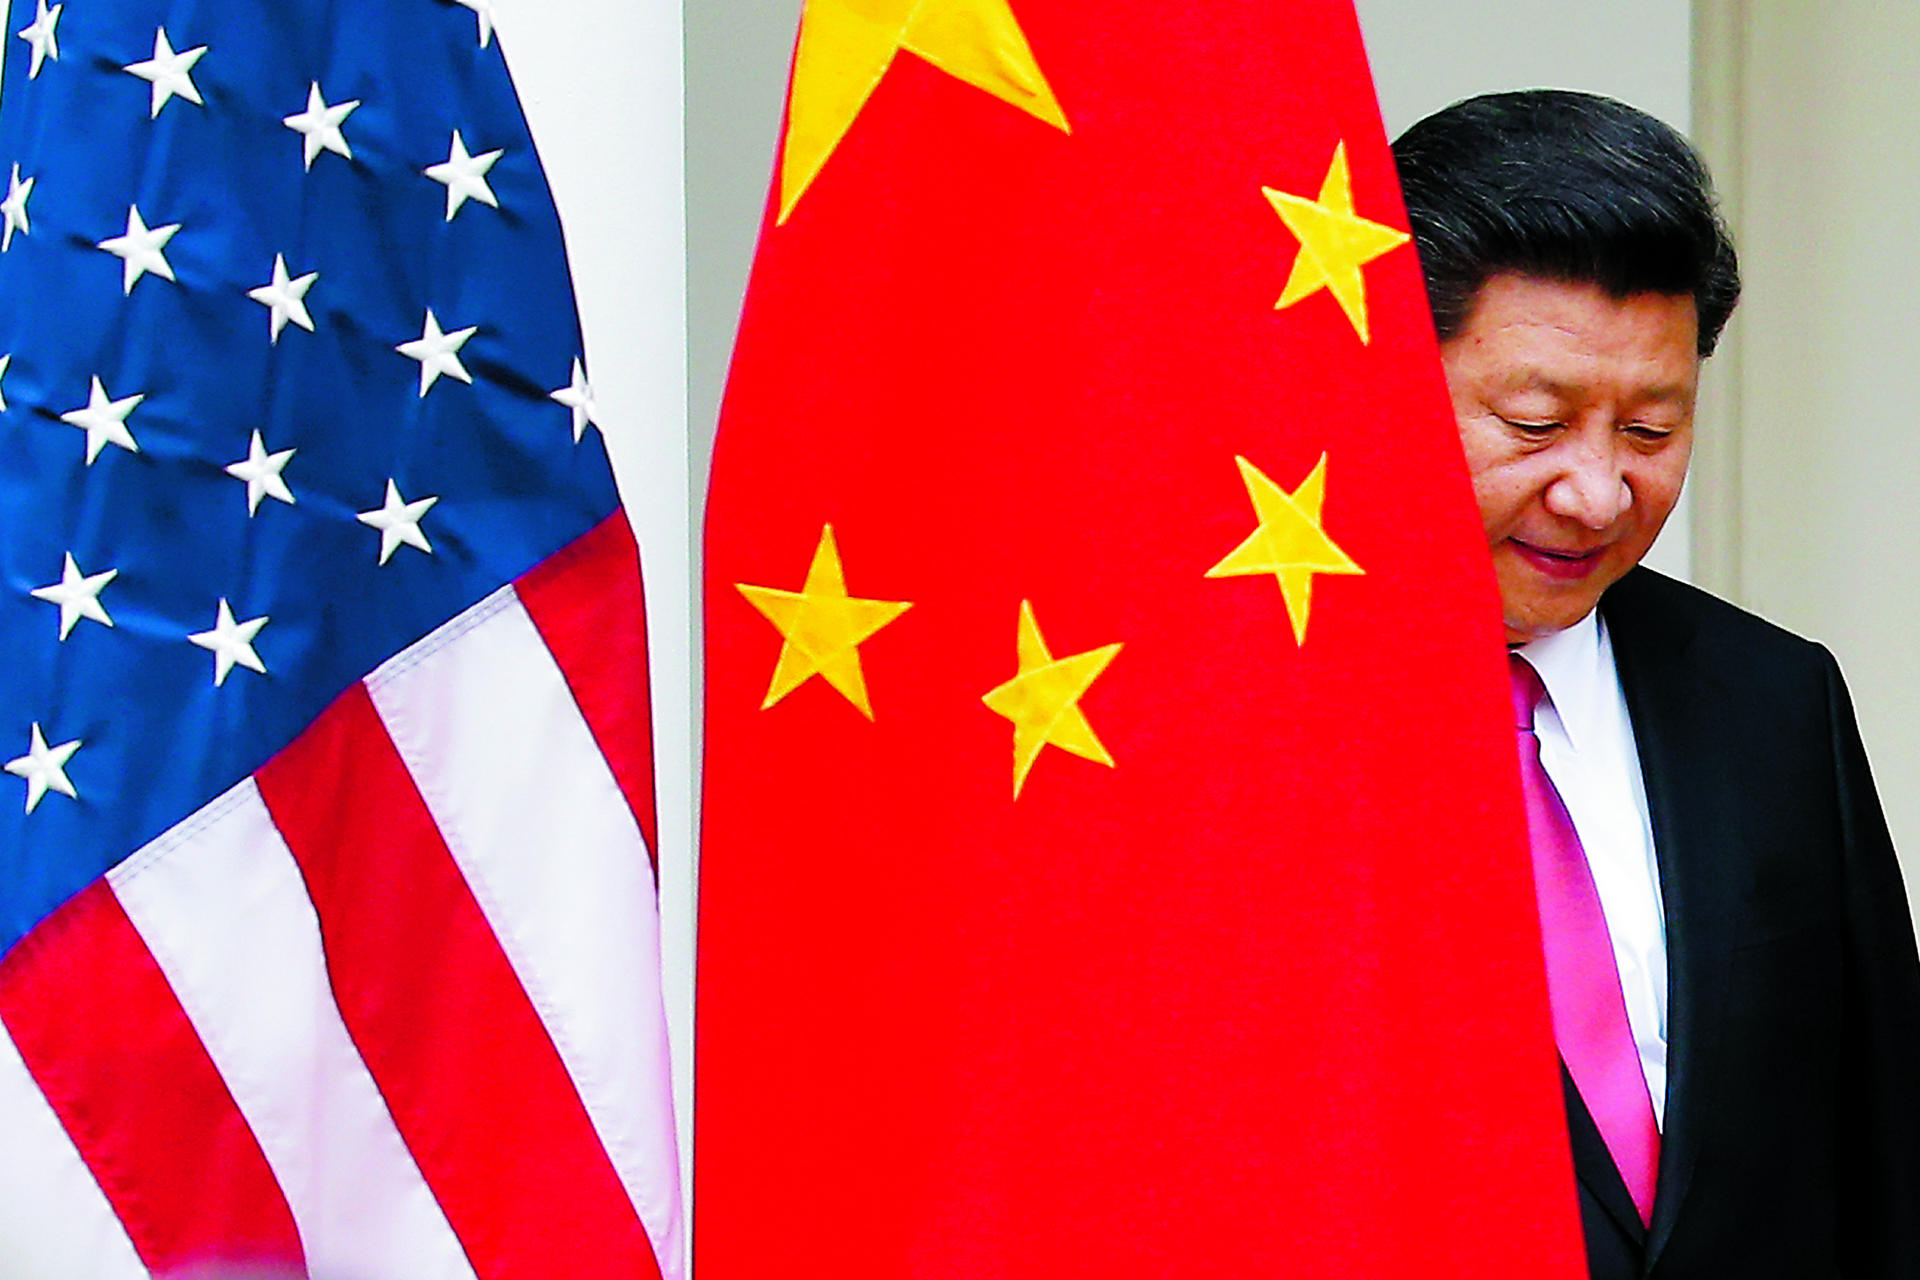 President Xi Jinping steps out from behind a Chinese flag as he takes his position for his joint news conference with President Barack Obama. Photo: AP